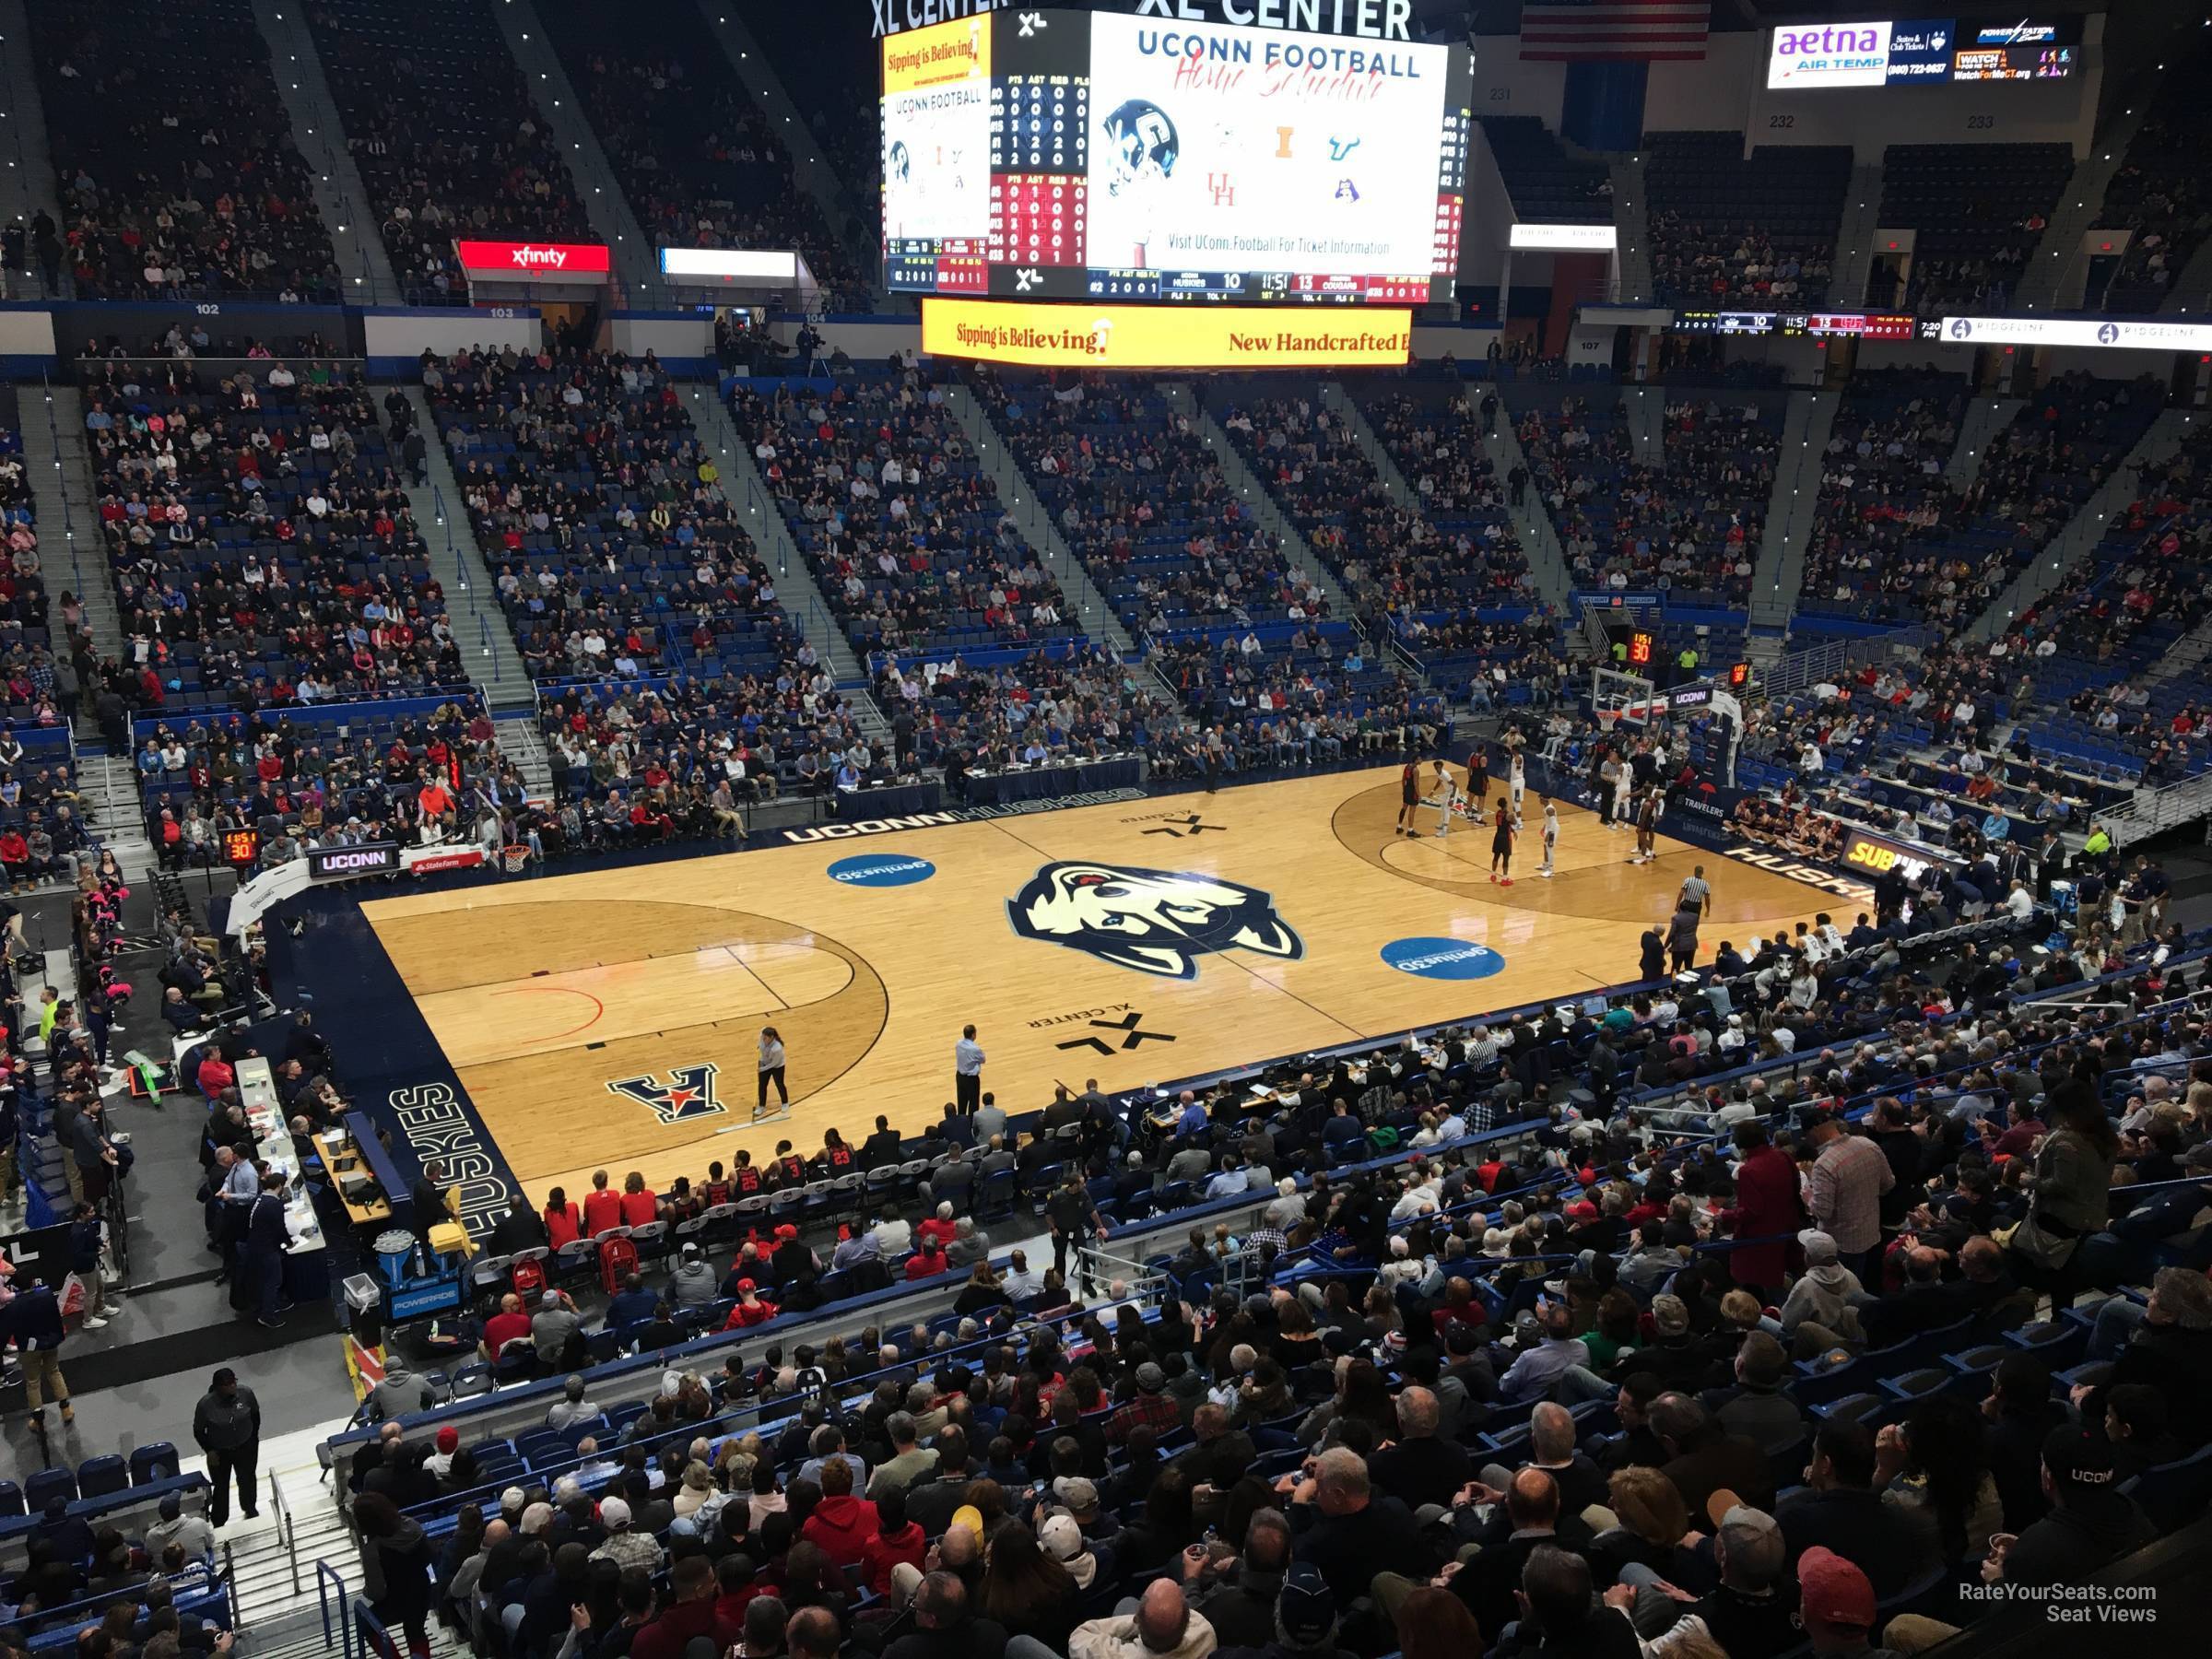 section 217, row a seat view  - xl center